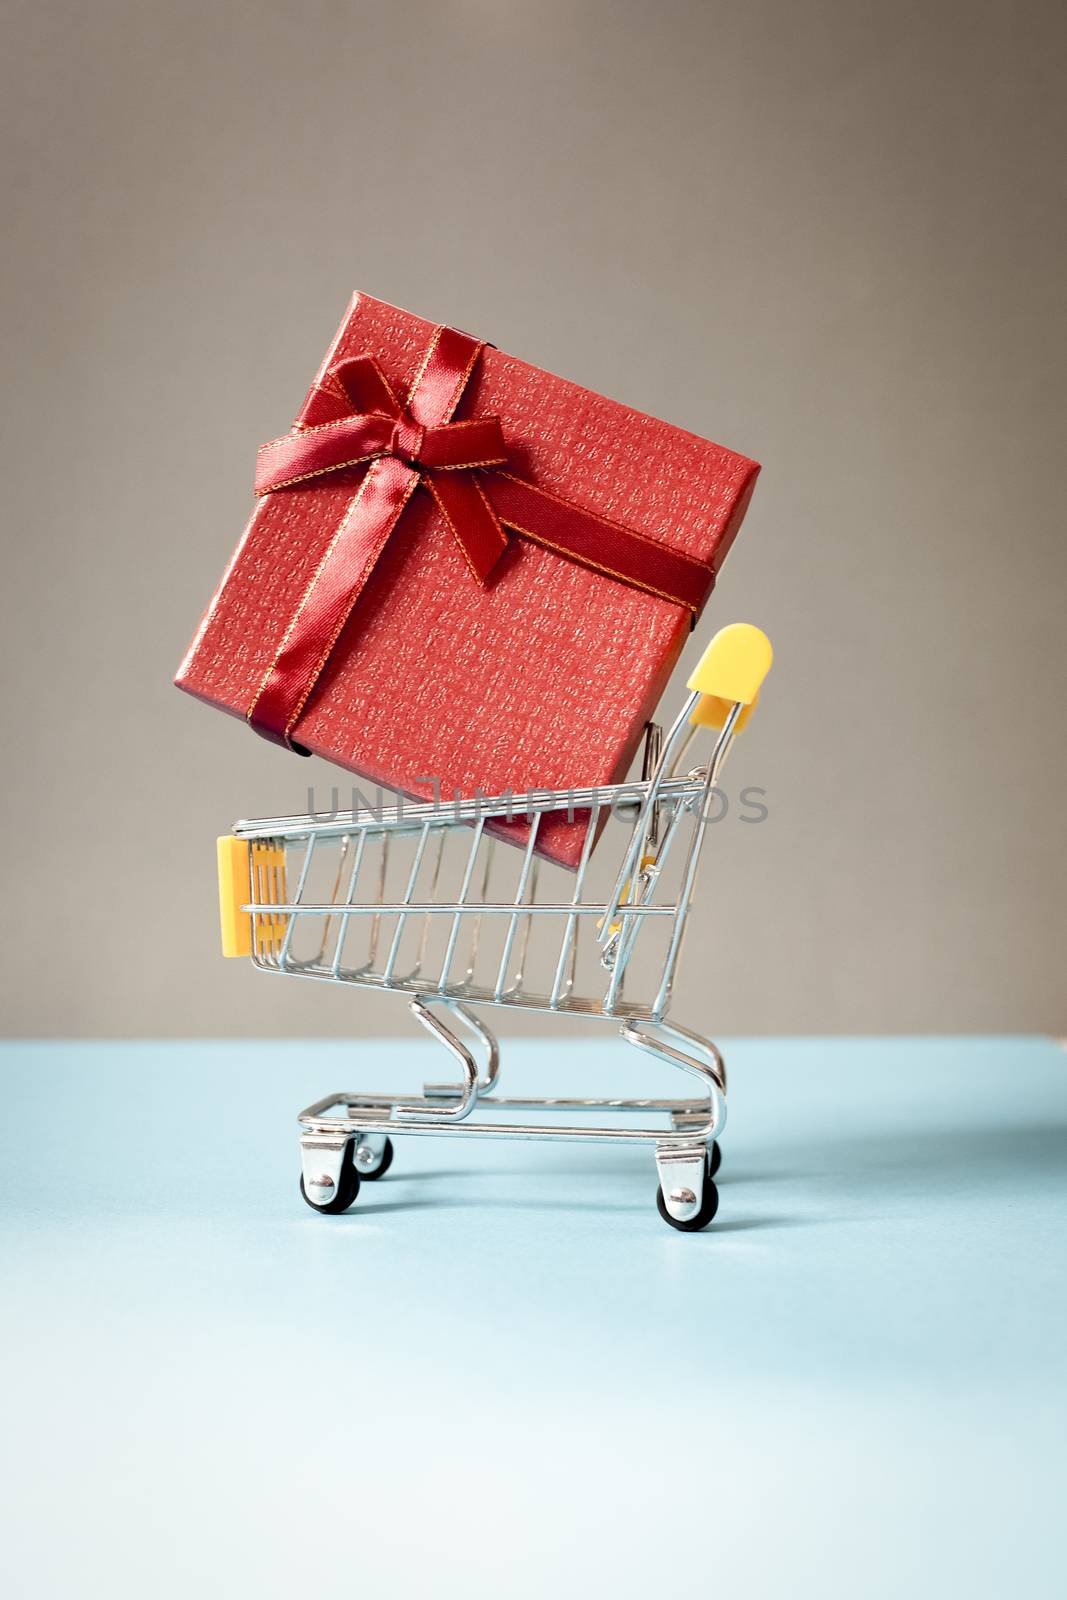 huge red gift box in shopping cart - online shopping by melis